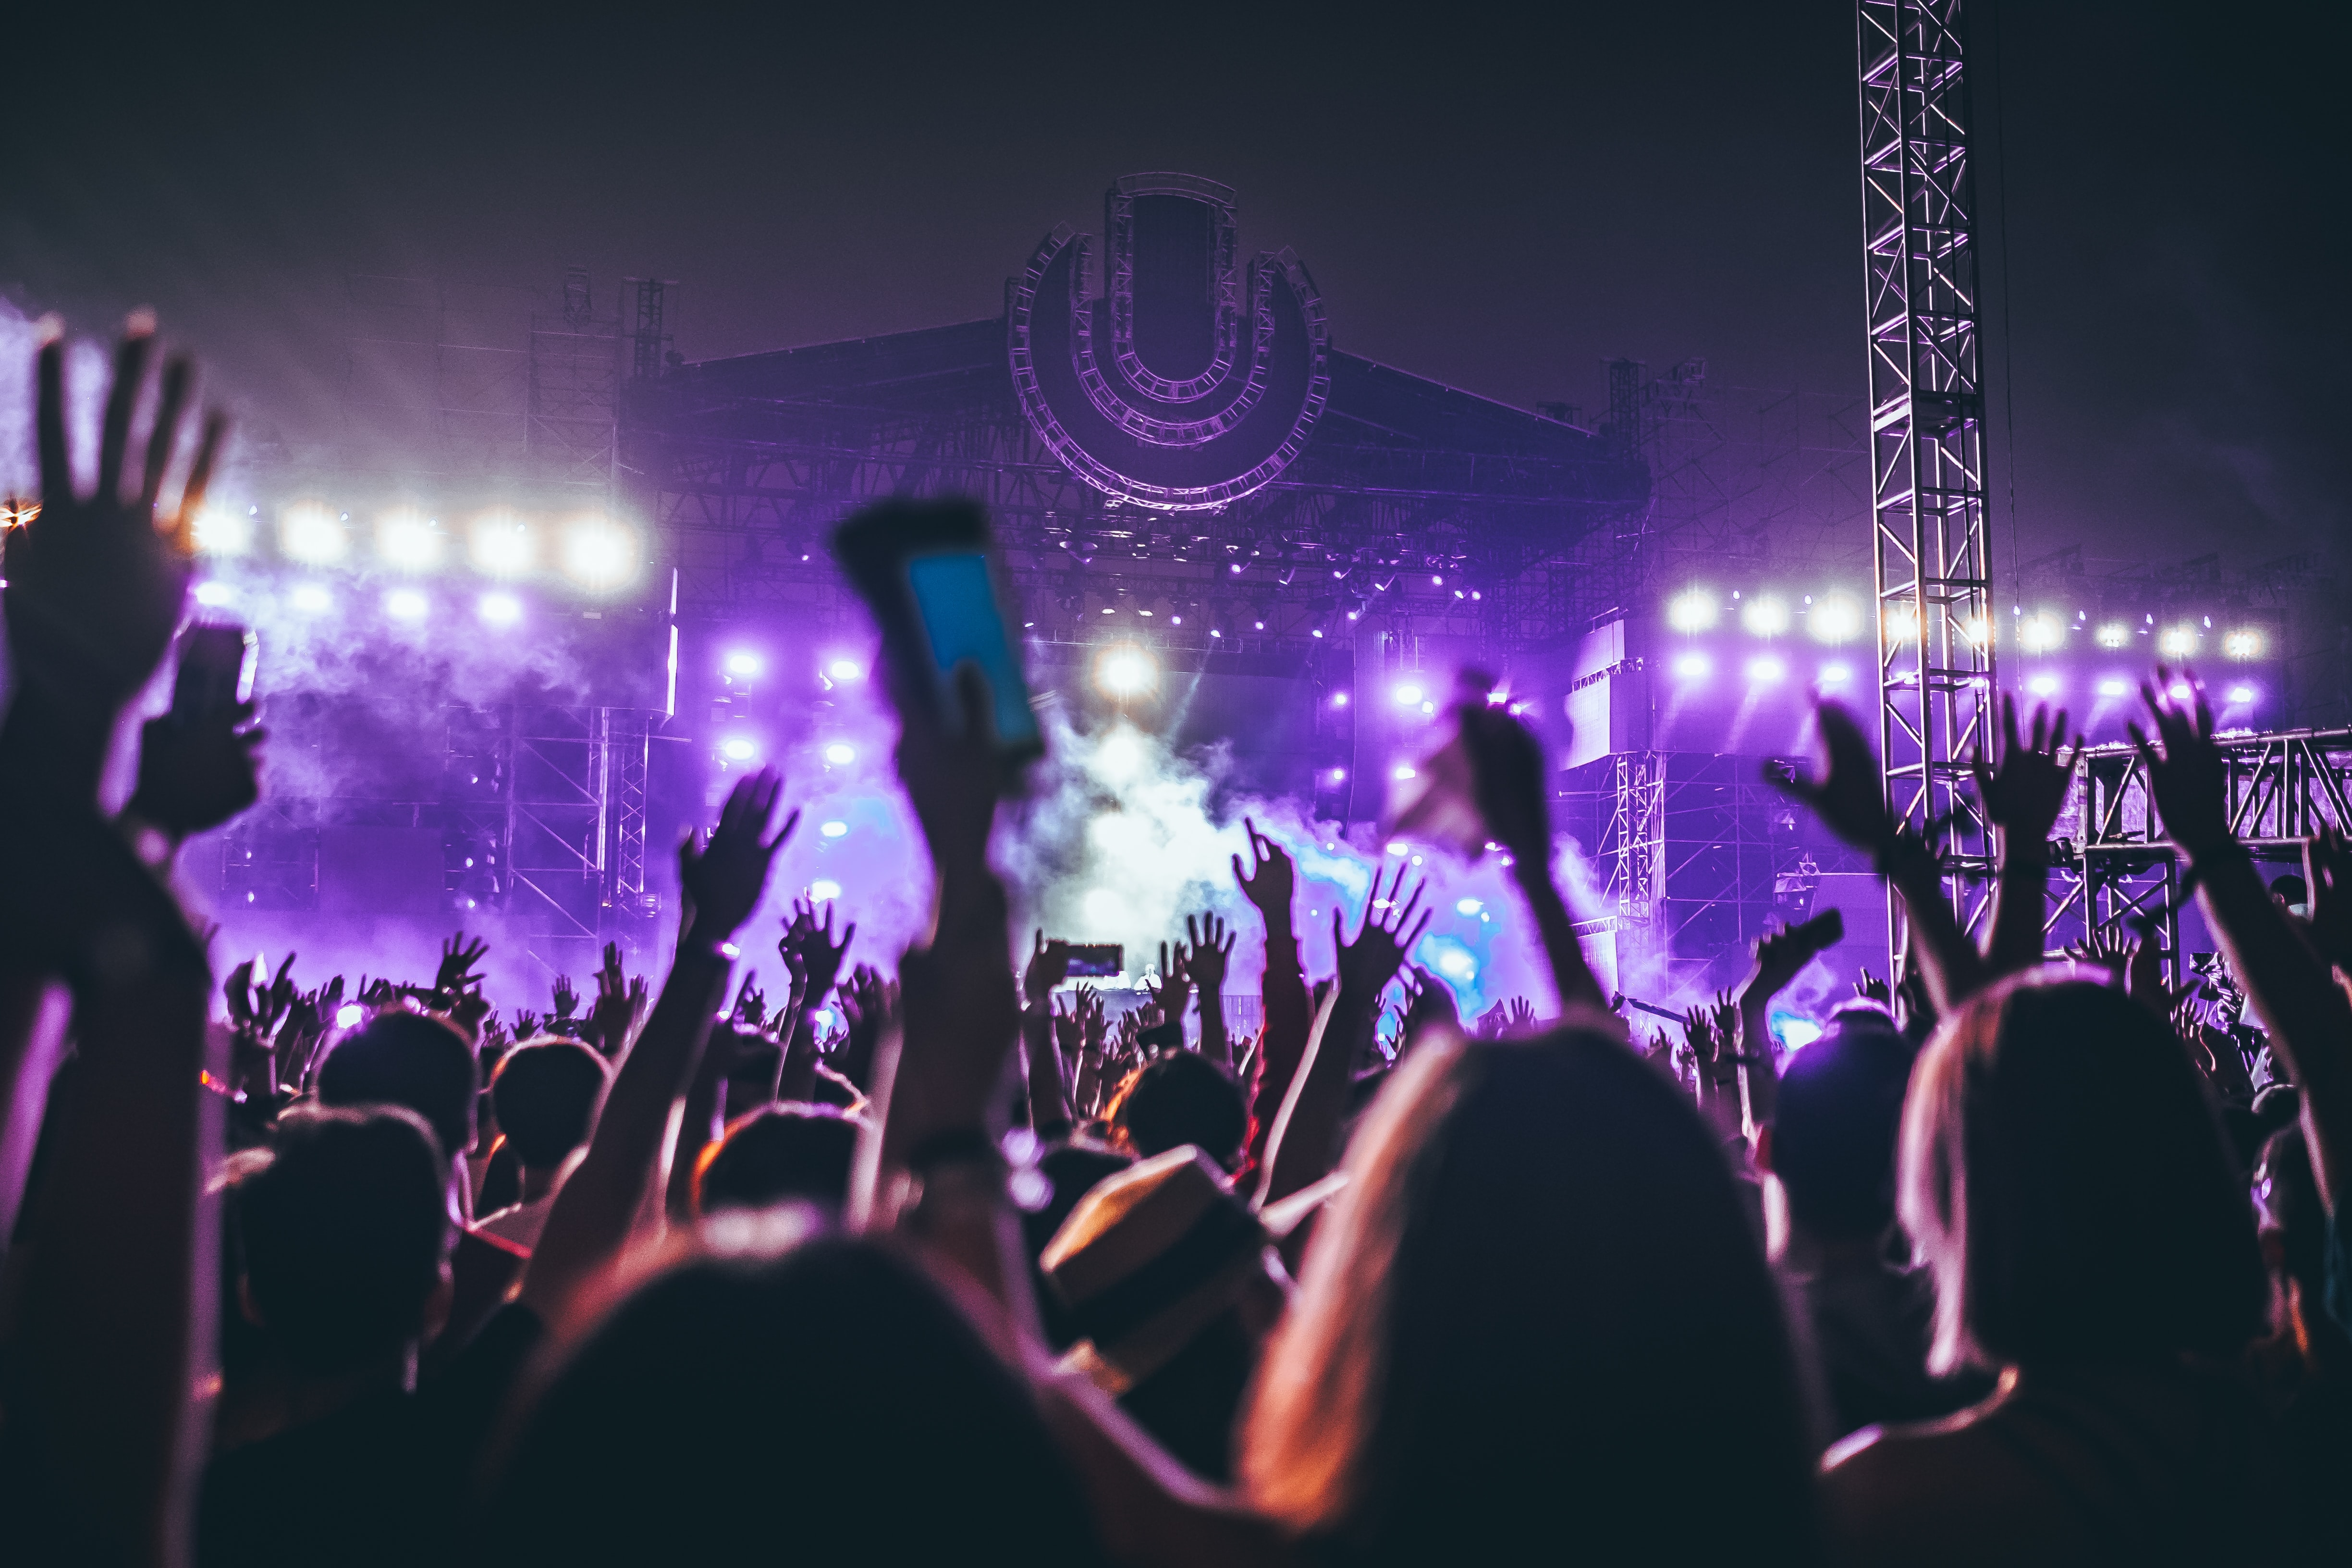 Photo is taken from in the crowd at a music festival with everyone facing towards the main stage with their hands in the air.